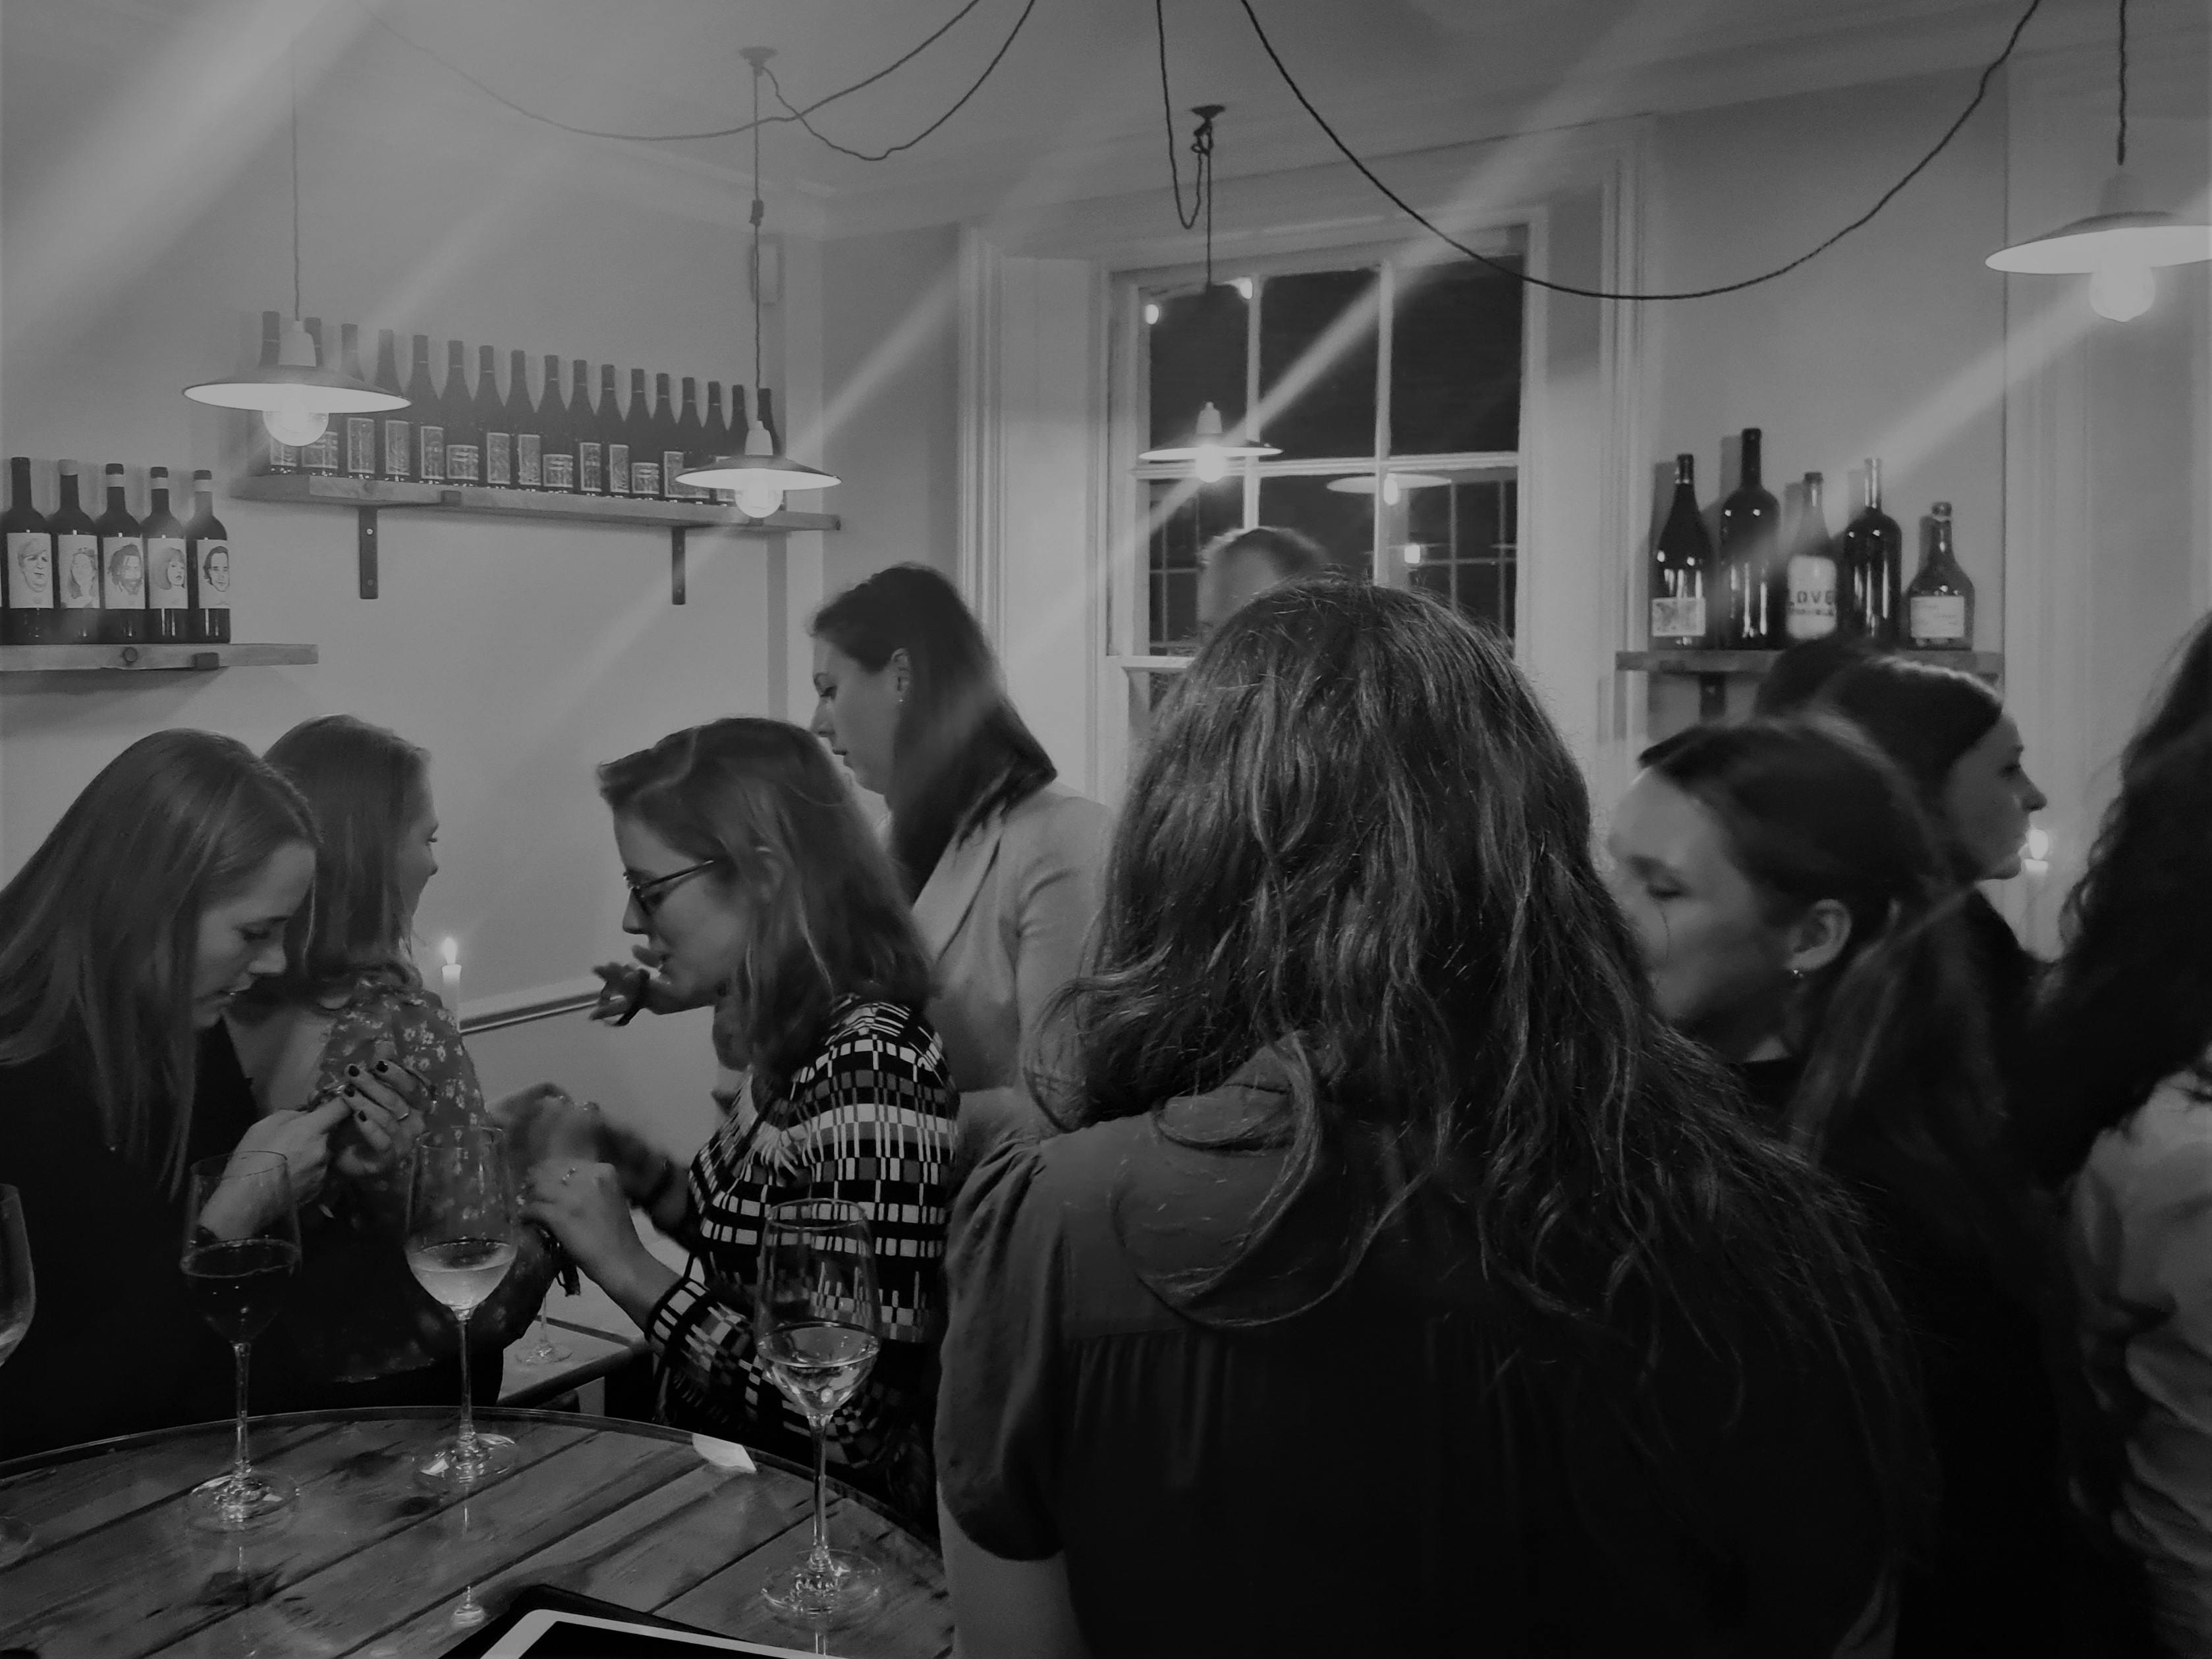 A black and whte image of women looking at and talking about watches in a wine bar, with lights glinting overhead and wine bottled on shelves at the rear